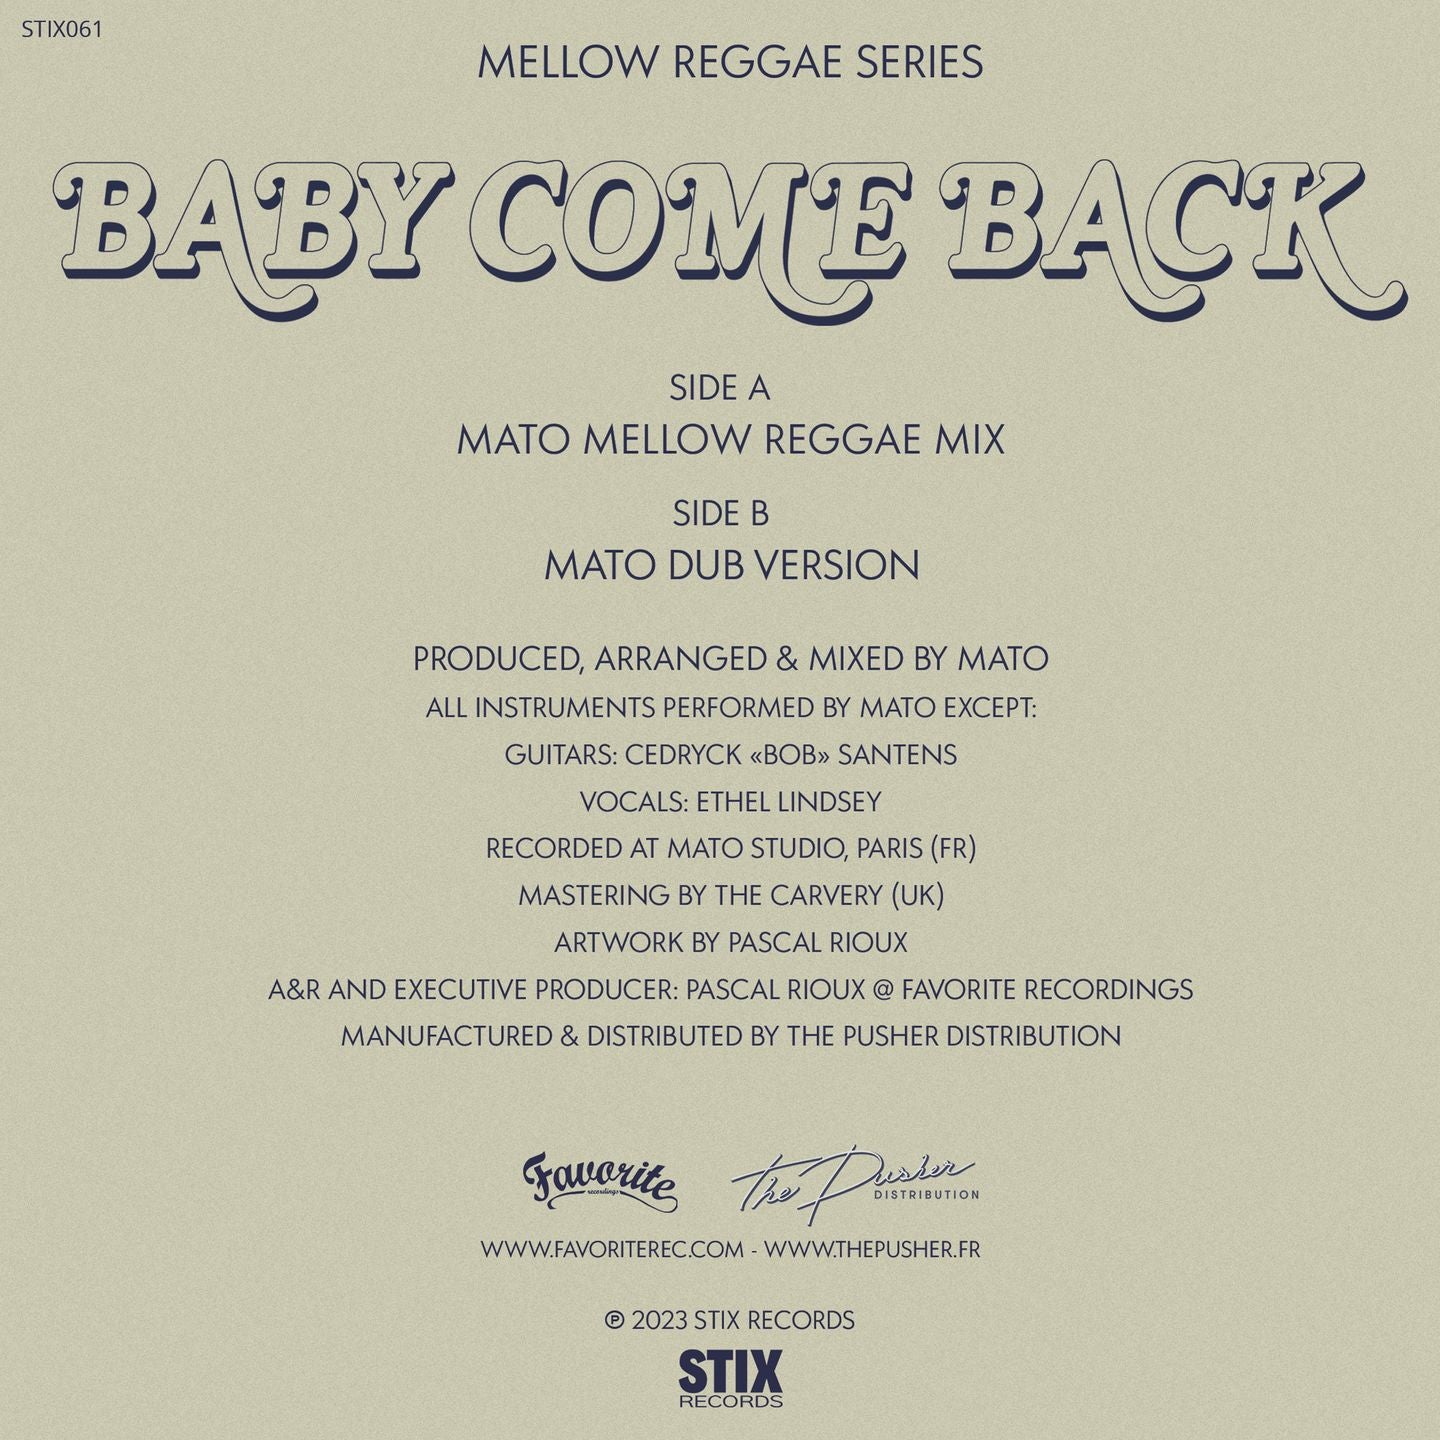 Mato Feat. Ethel Lindsey – Baby Come Back